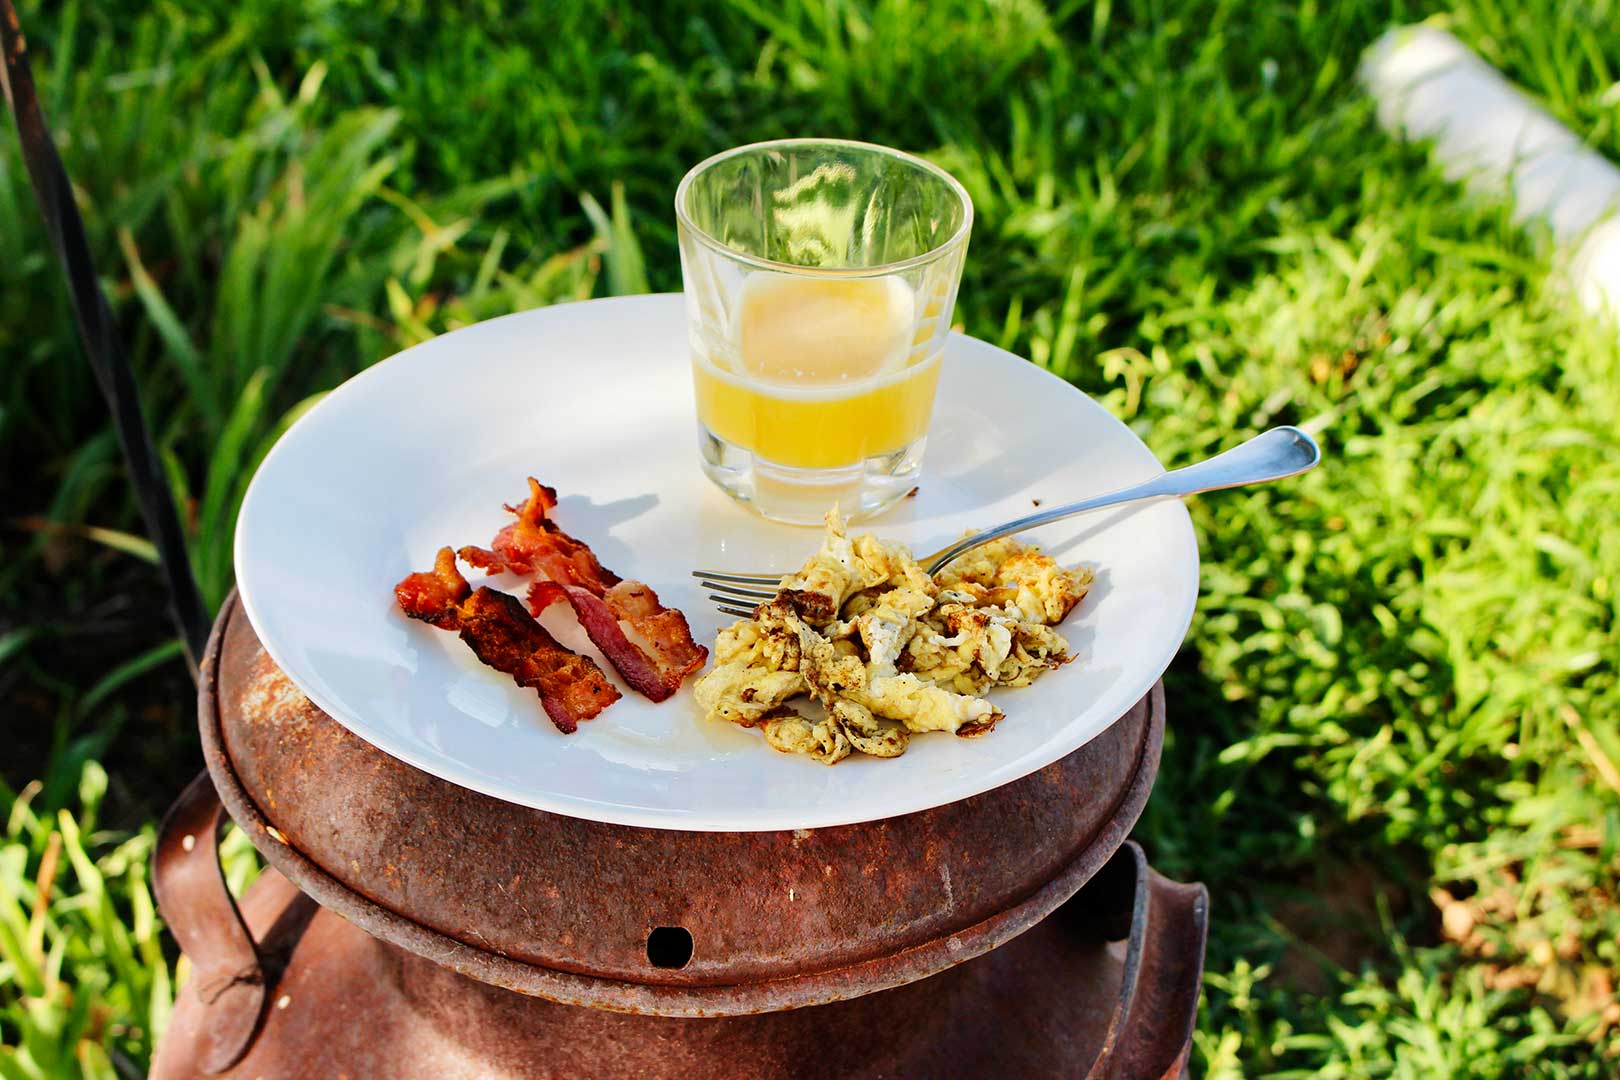 A plate of bacon, eggs and juice breakfast sitting on top of old oil can.